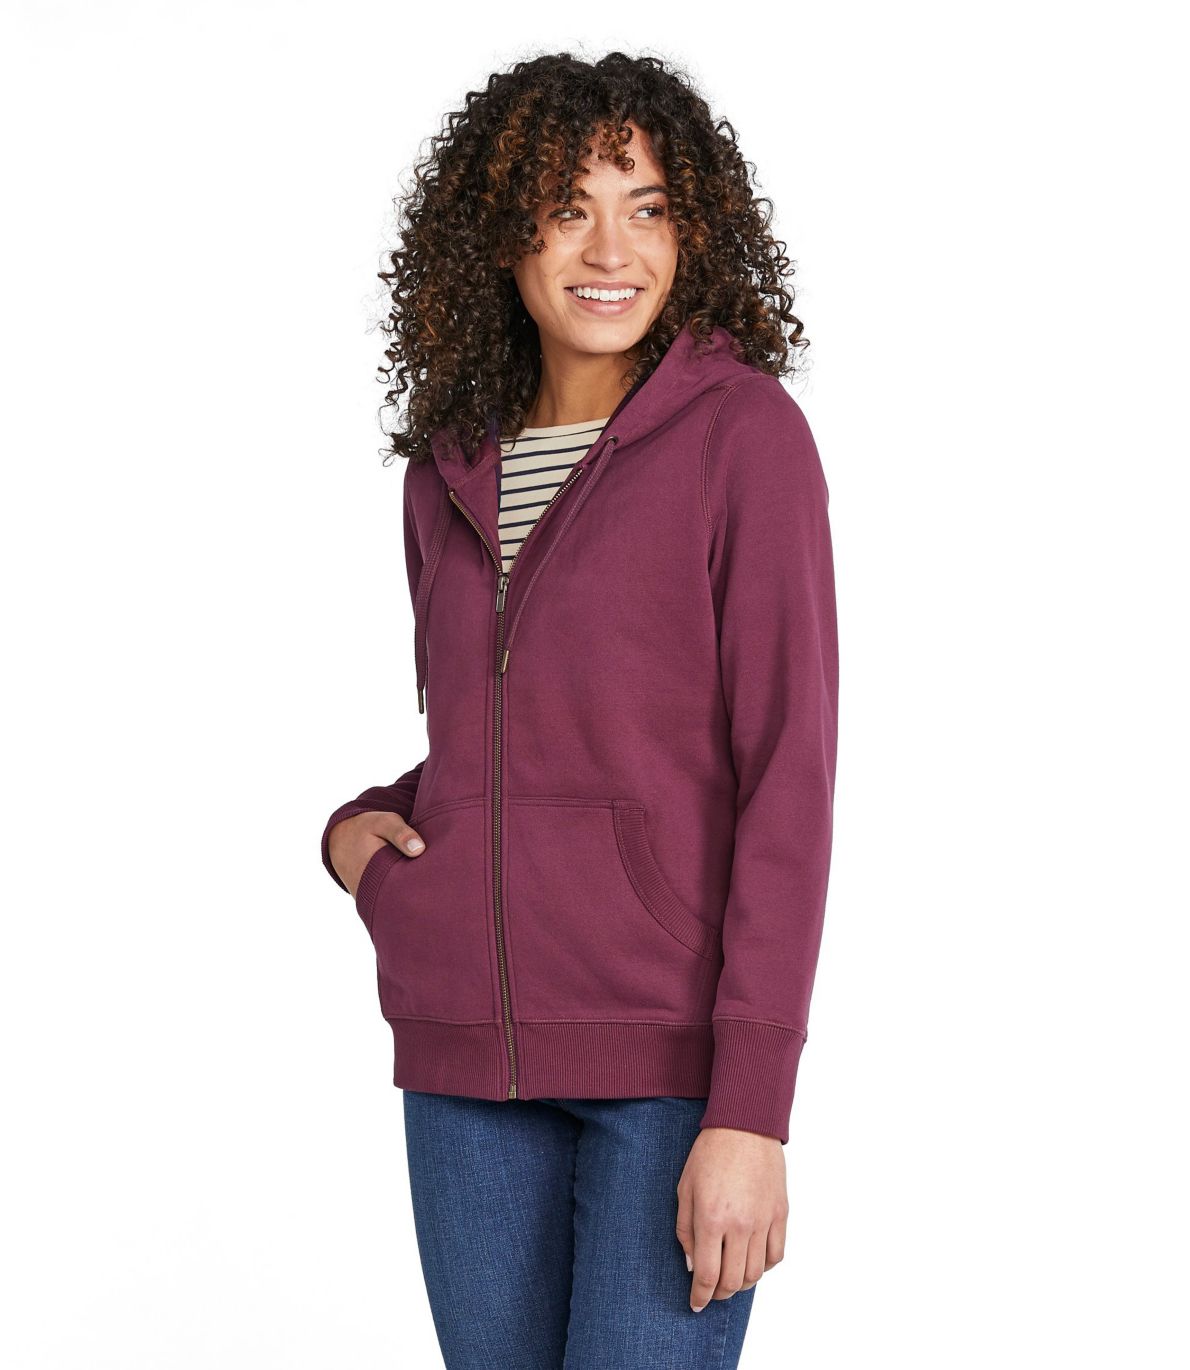 Women's Bean's Flannel-Lined Hoodie at L.L. Bean